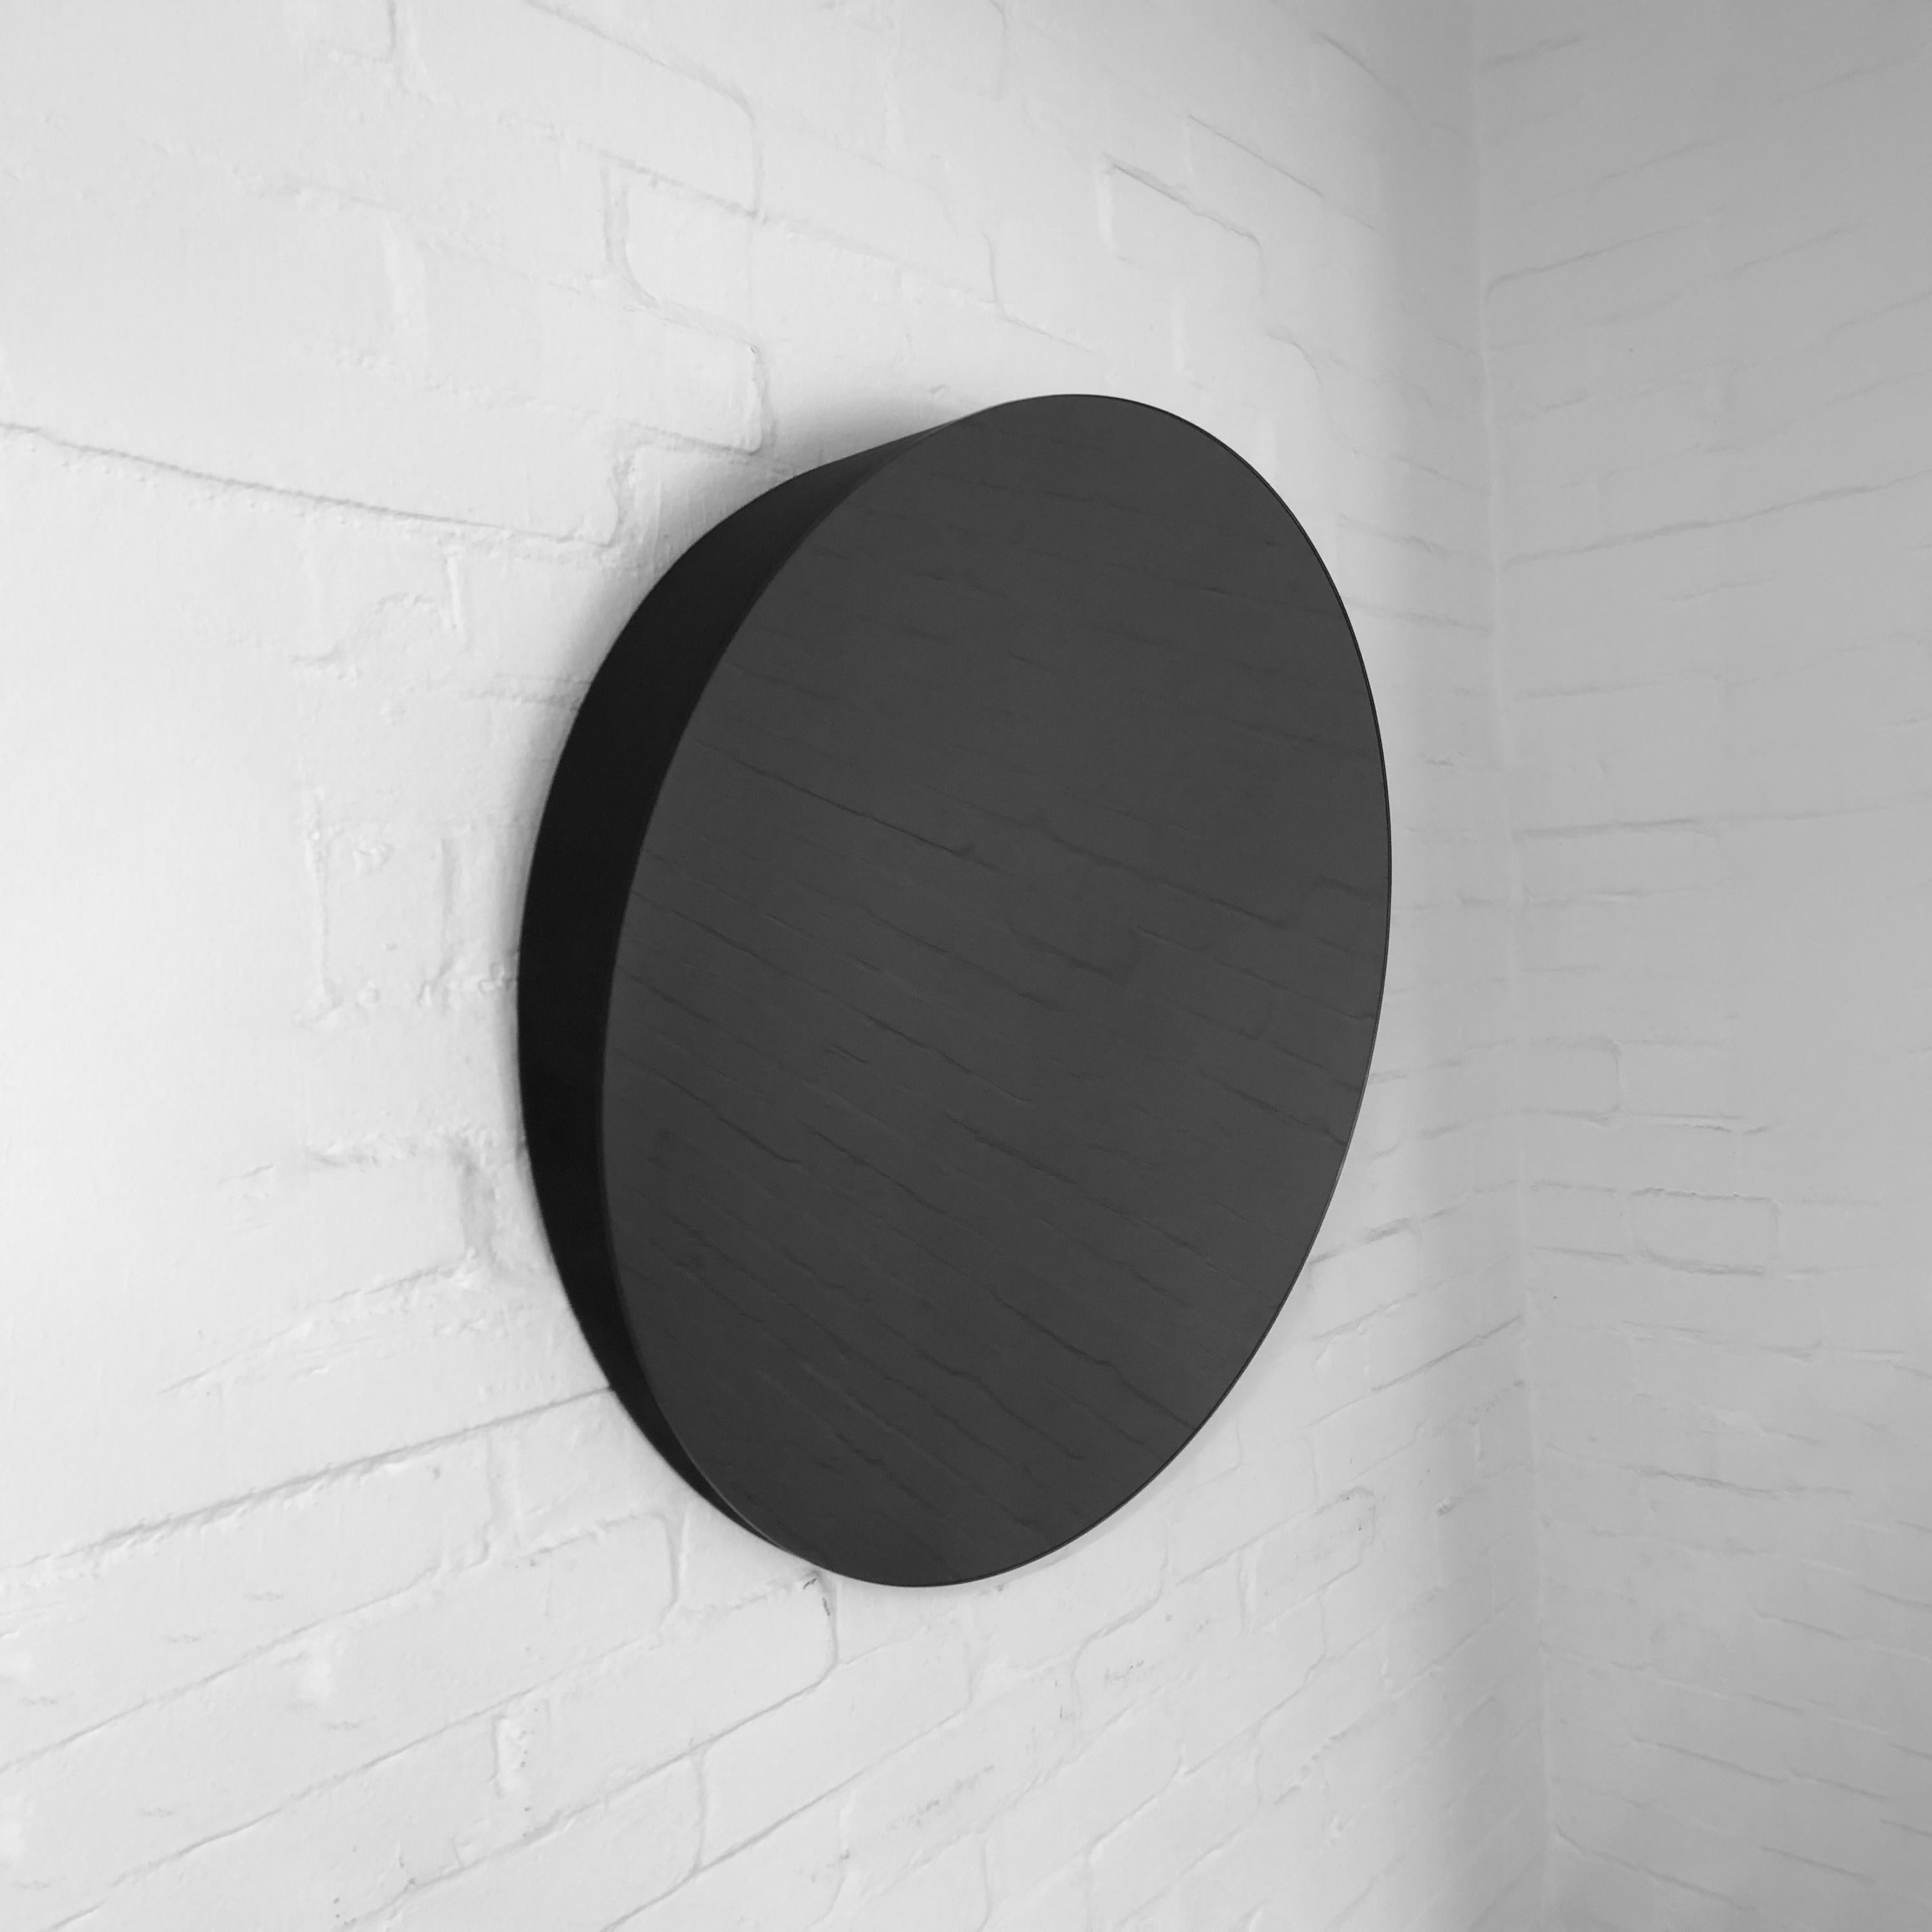 British Orbis Round Tilted Frameless Minimalist Accessible Mirror, Large For Sale